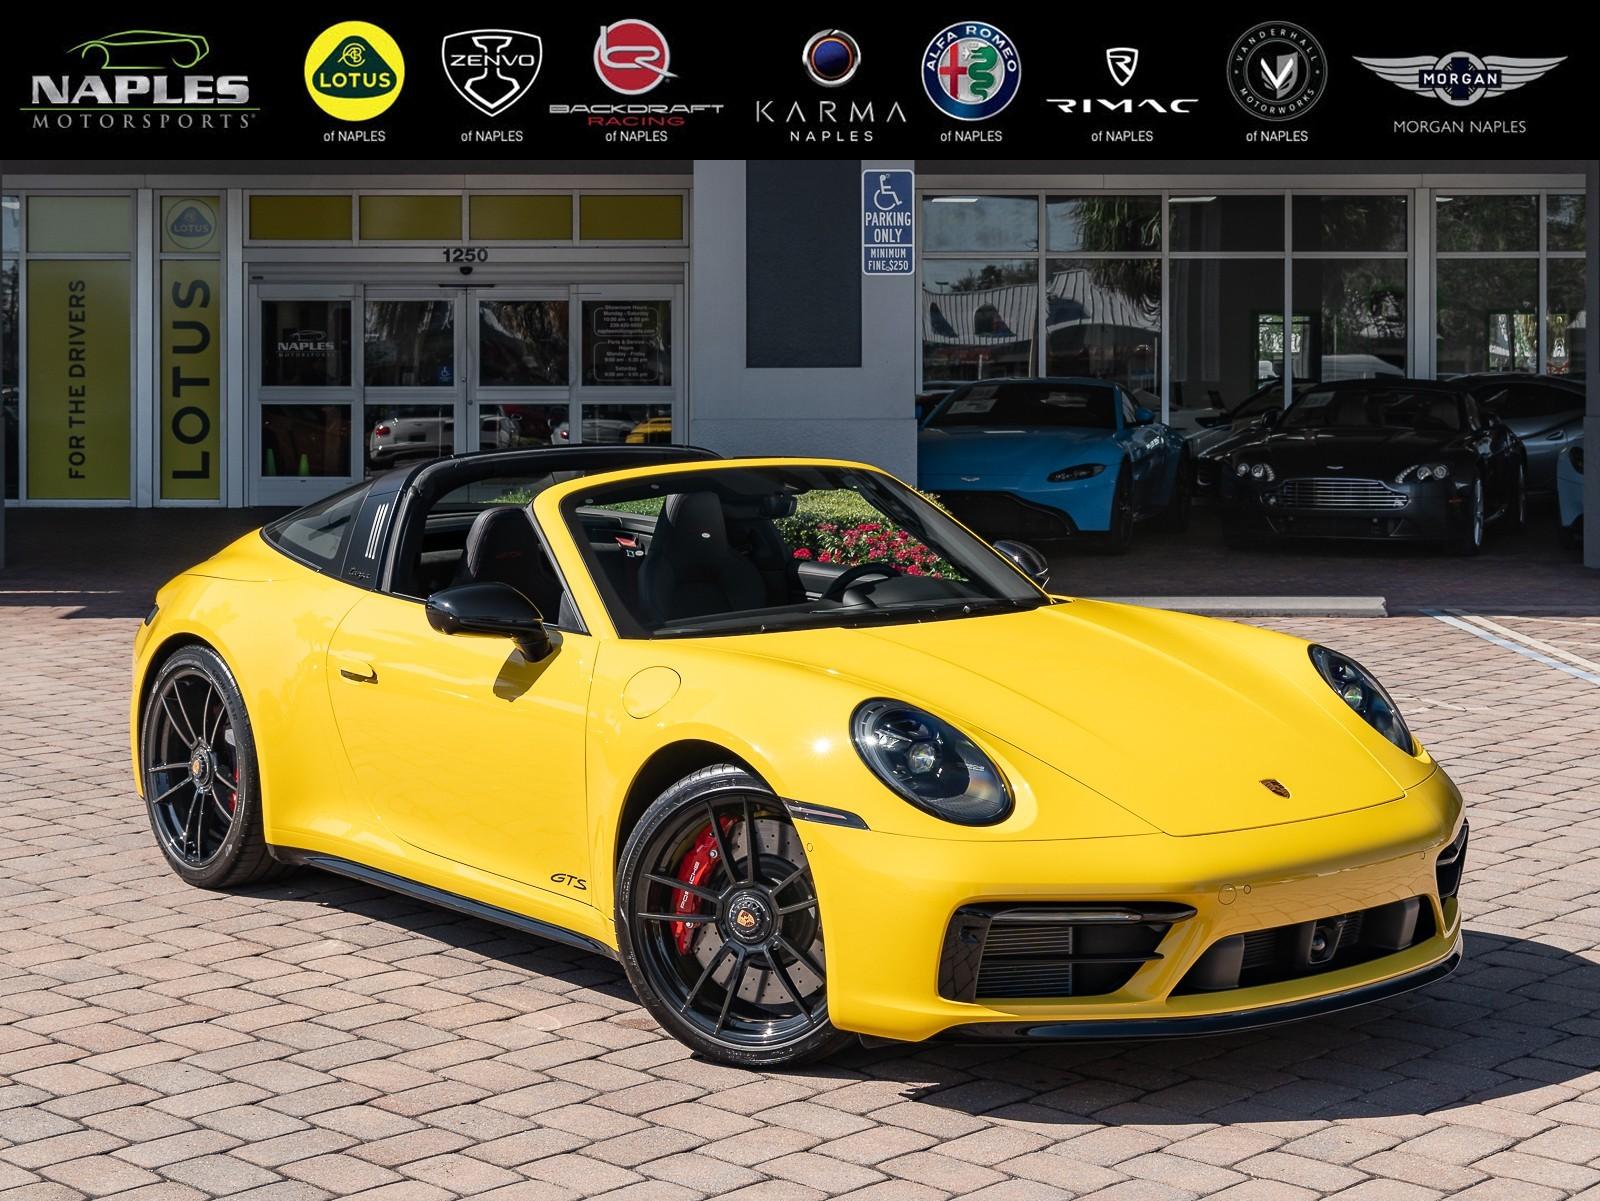 Porsche 911 Turbo S Guards Red with Black Stripes Limited Edition